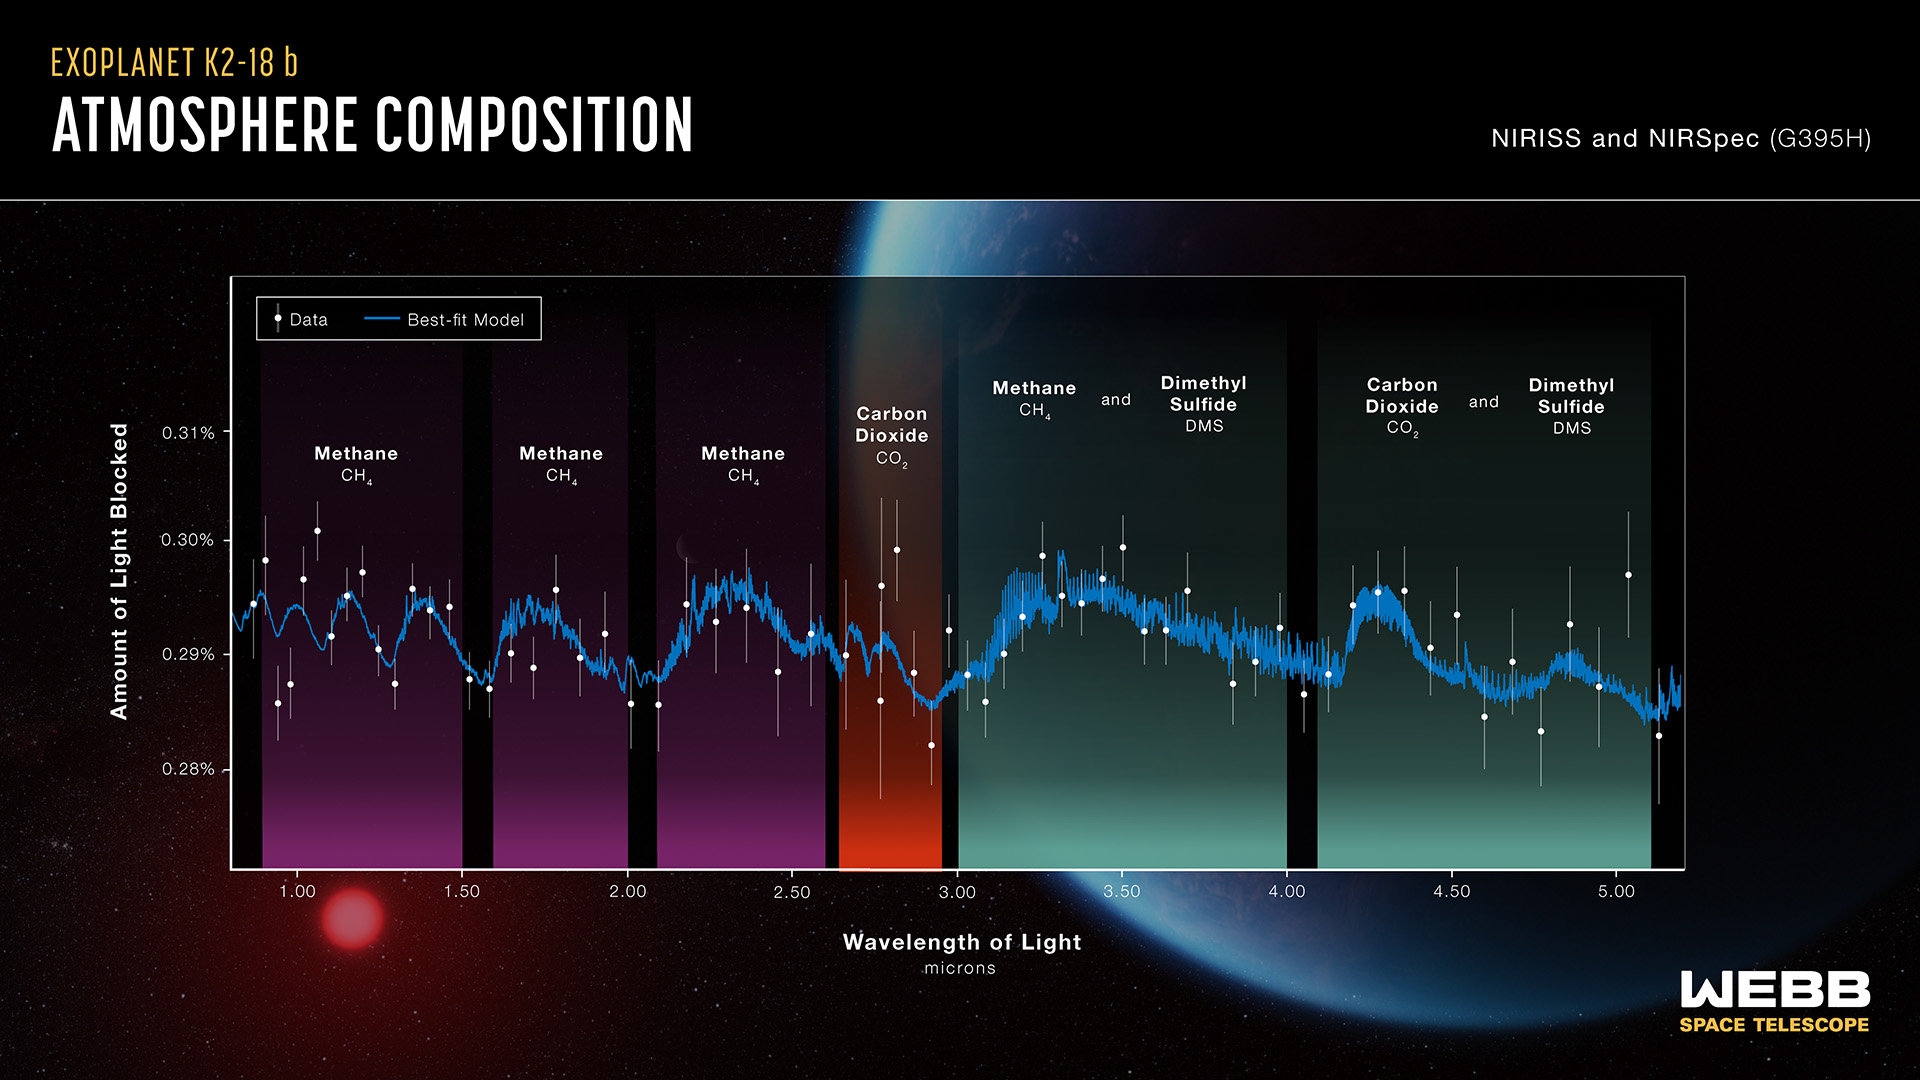 A graphic showing the spectra of K2-18 b, including an abundance of methane and carbon dioxide in the exoplanet’s atmosphere.